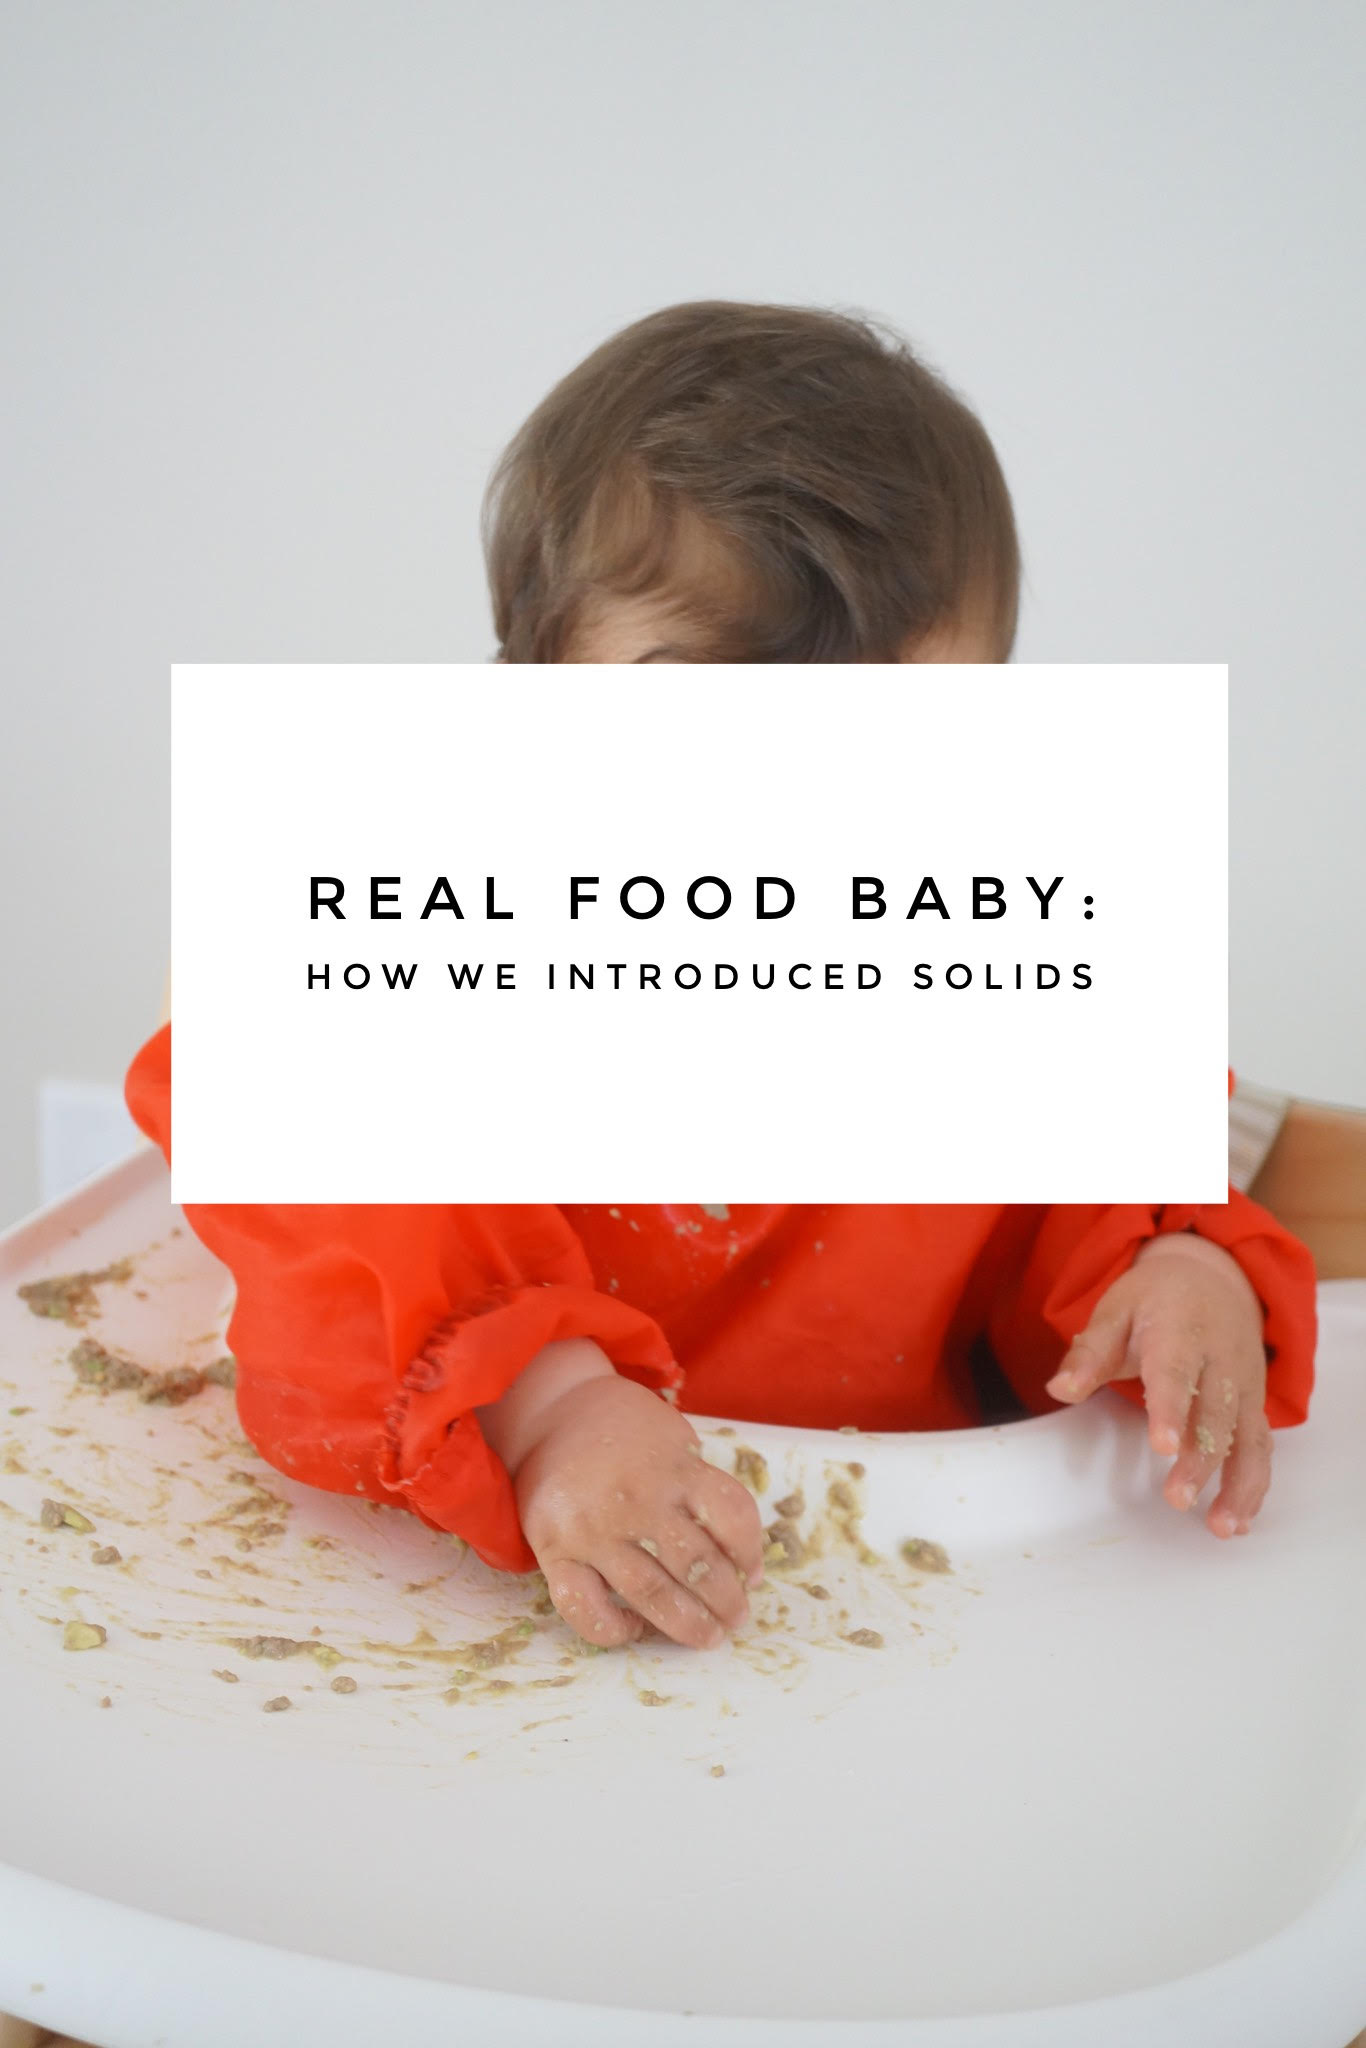 When, What, and How to Introduce Solid Foods, Nutrition